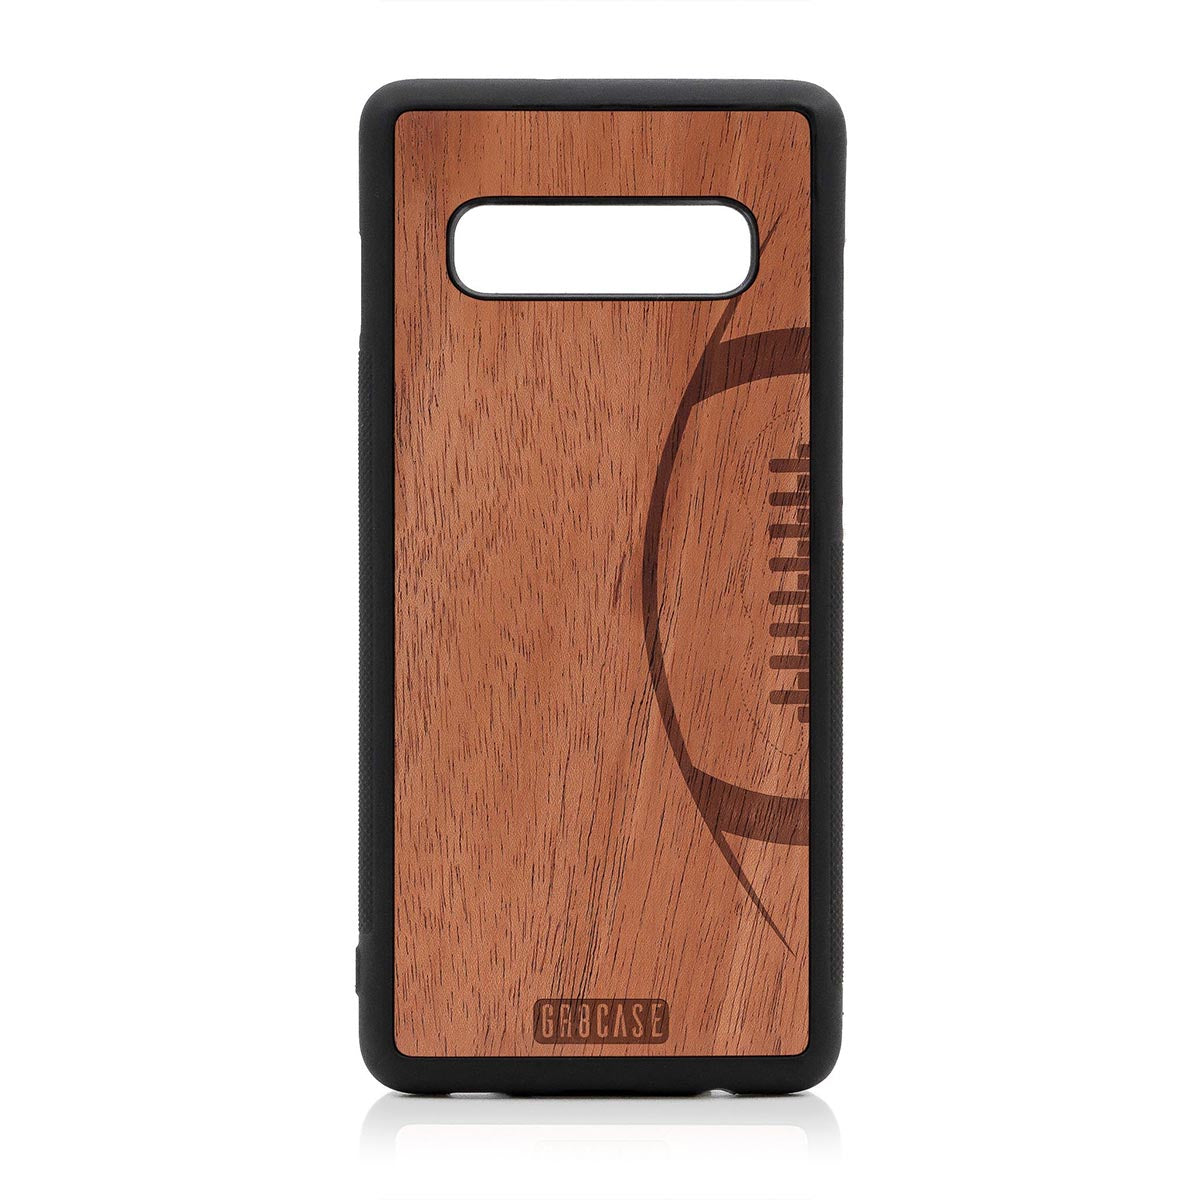 Football Design Wood Case For Samsung Galaxy S10 Plus by GR8CASE